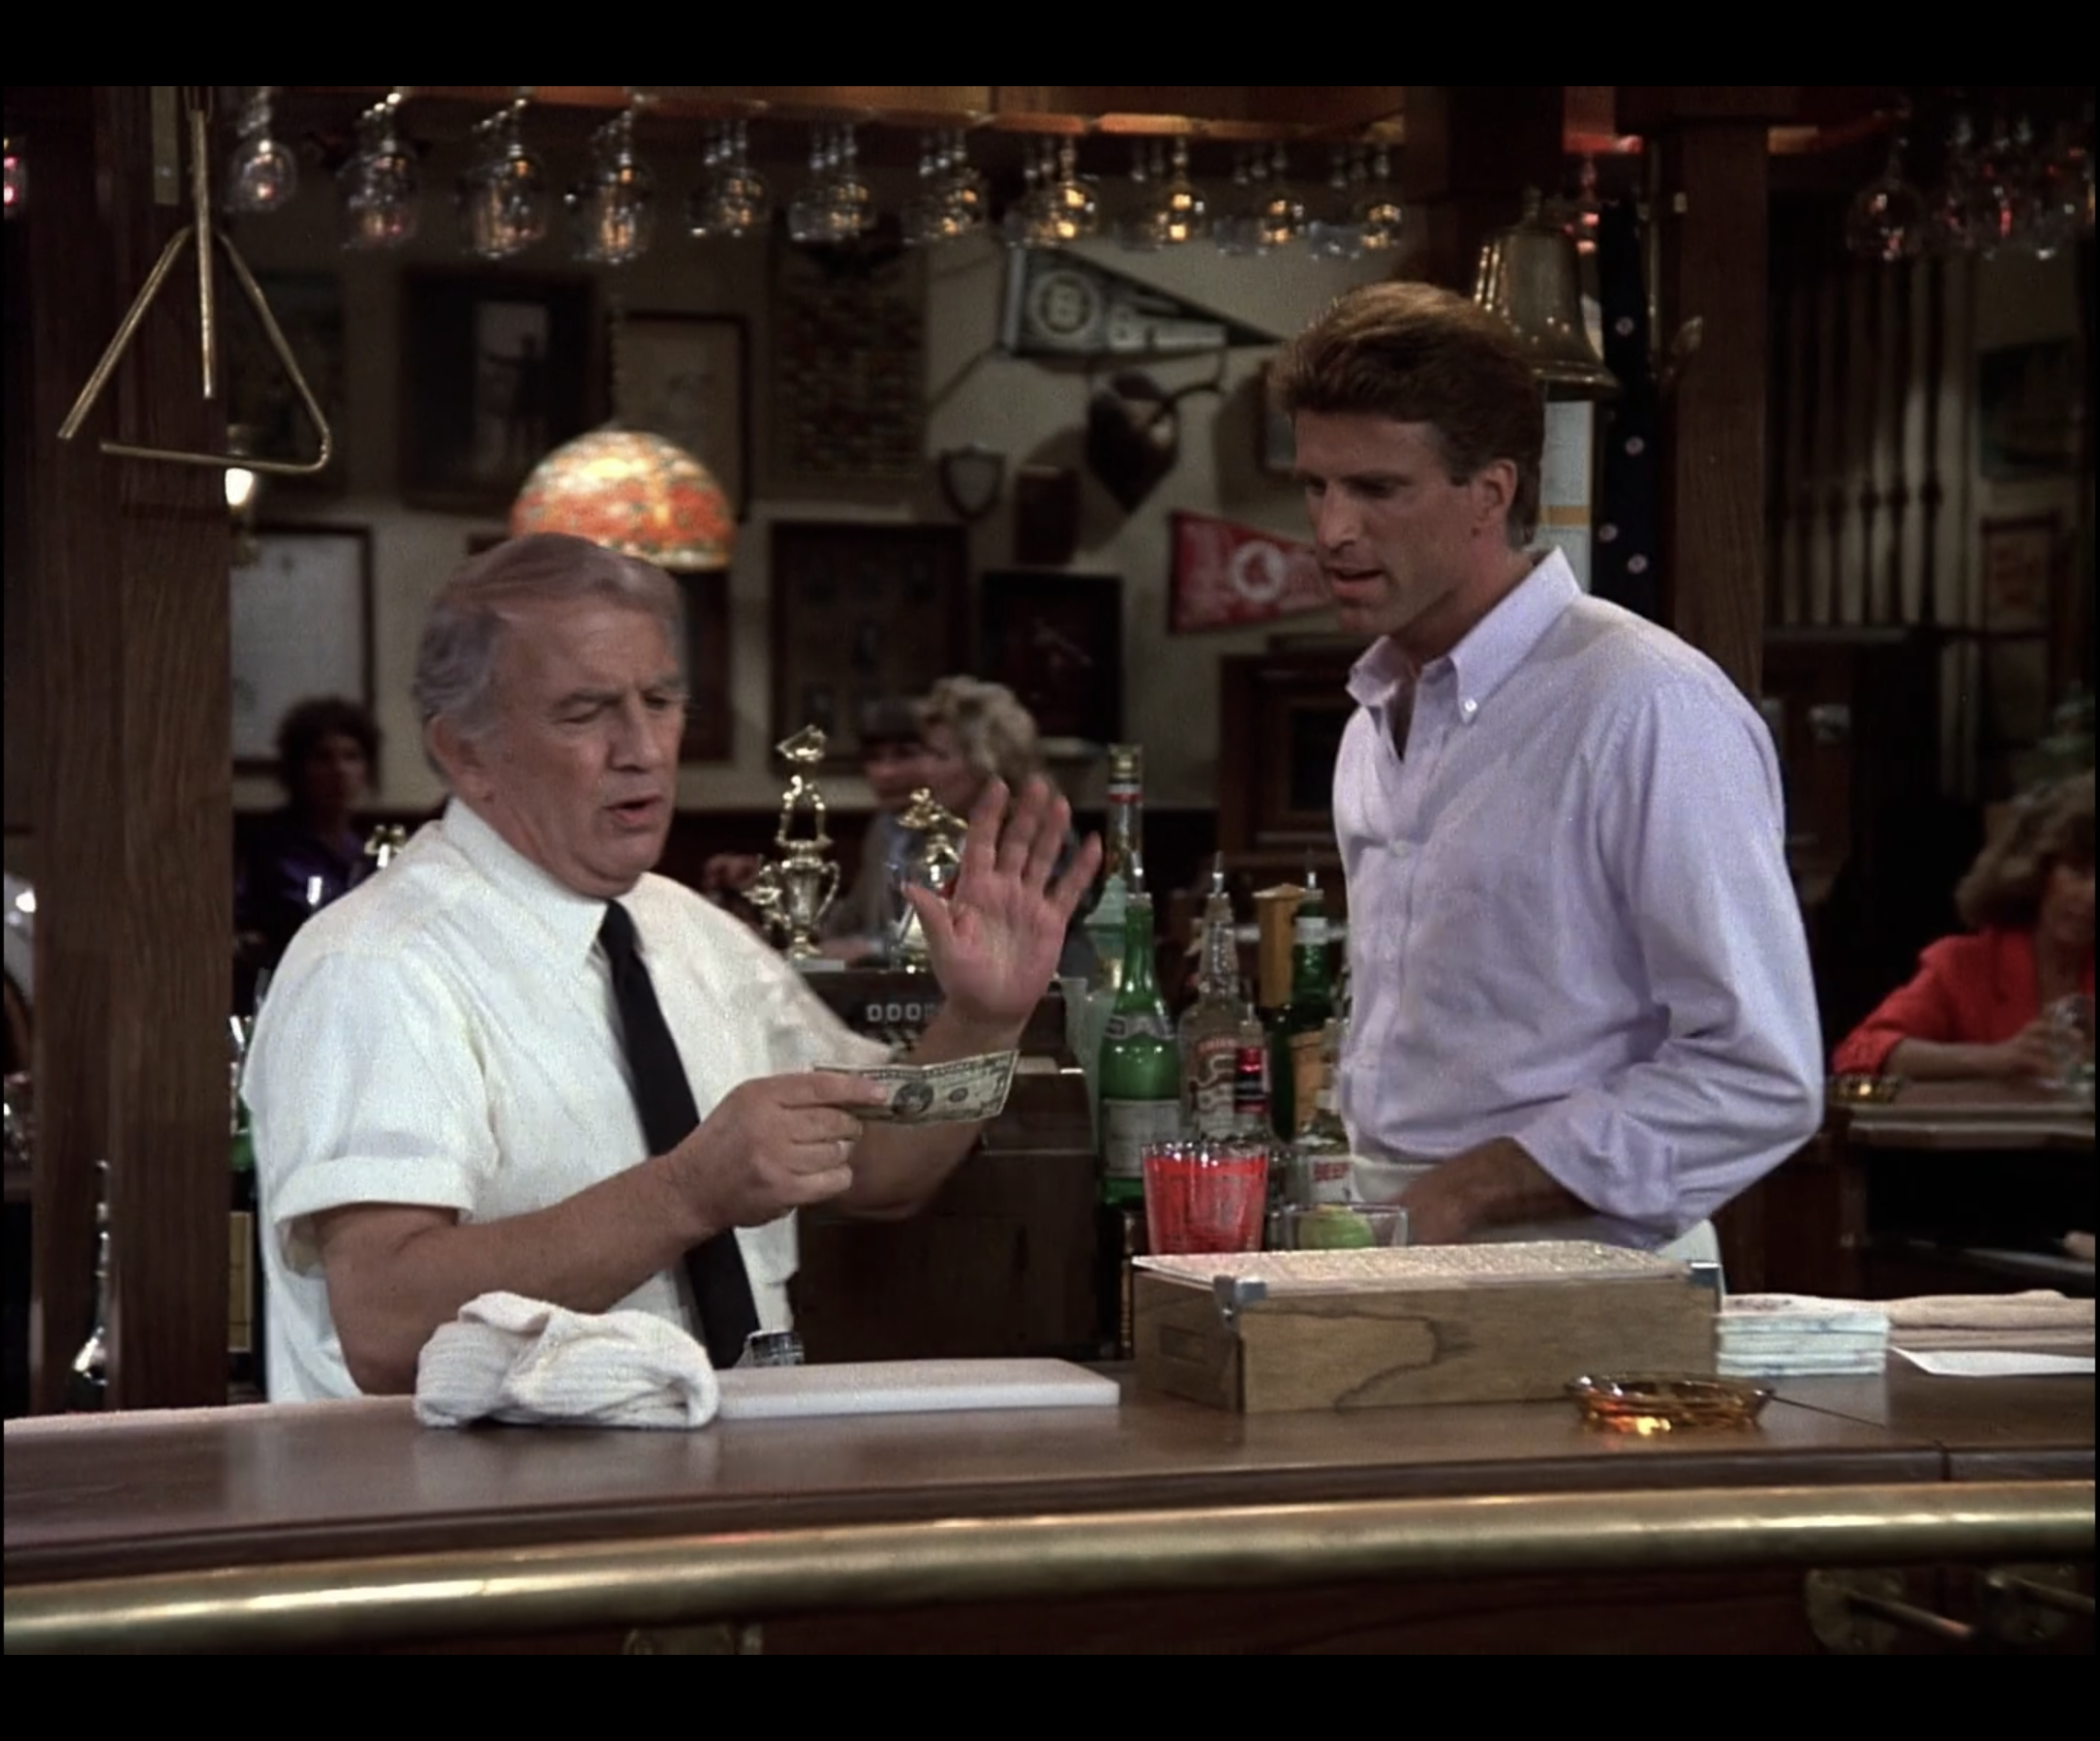 Ted Danson stands behind the bar